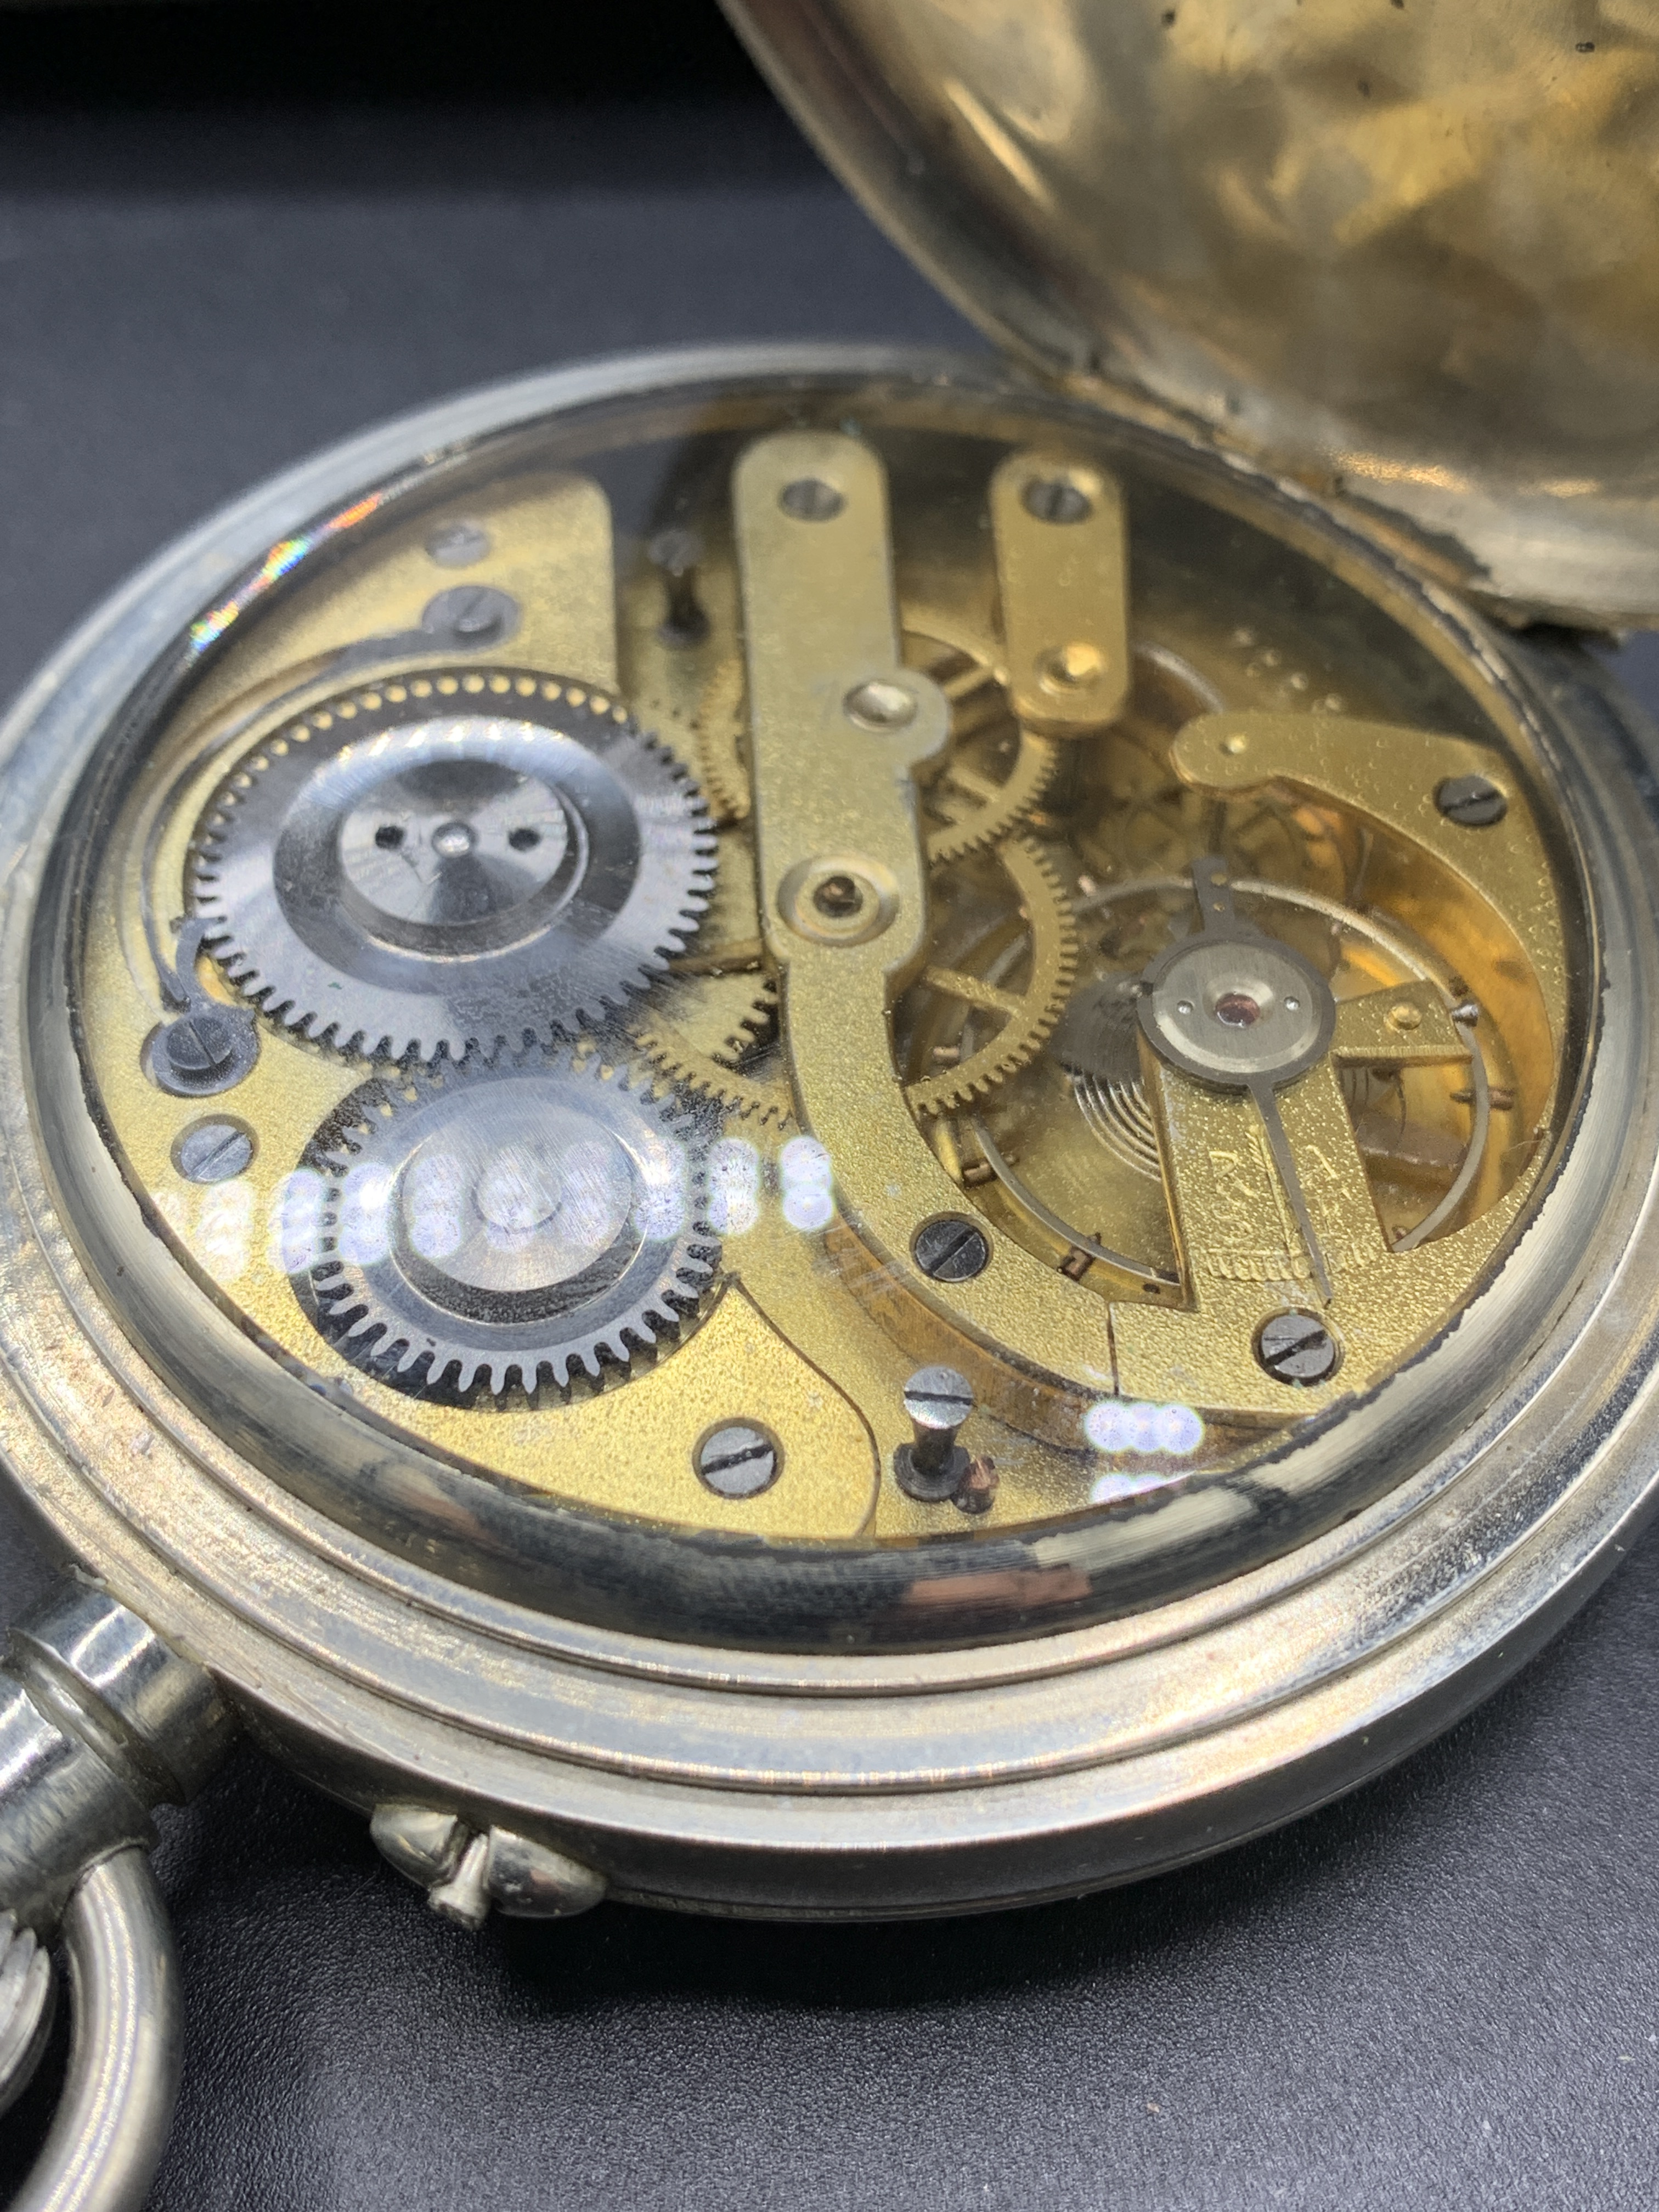 Goliath watch, in going order, in silver hallmarked engine turned case - Image 6 of 7